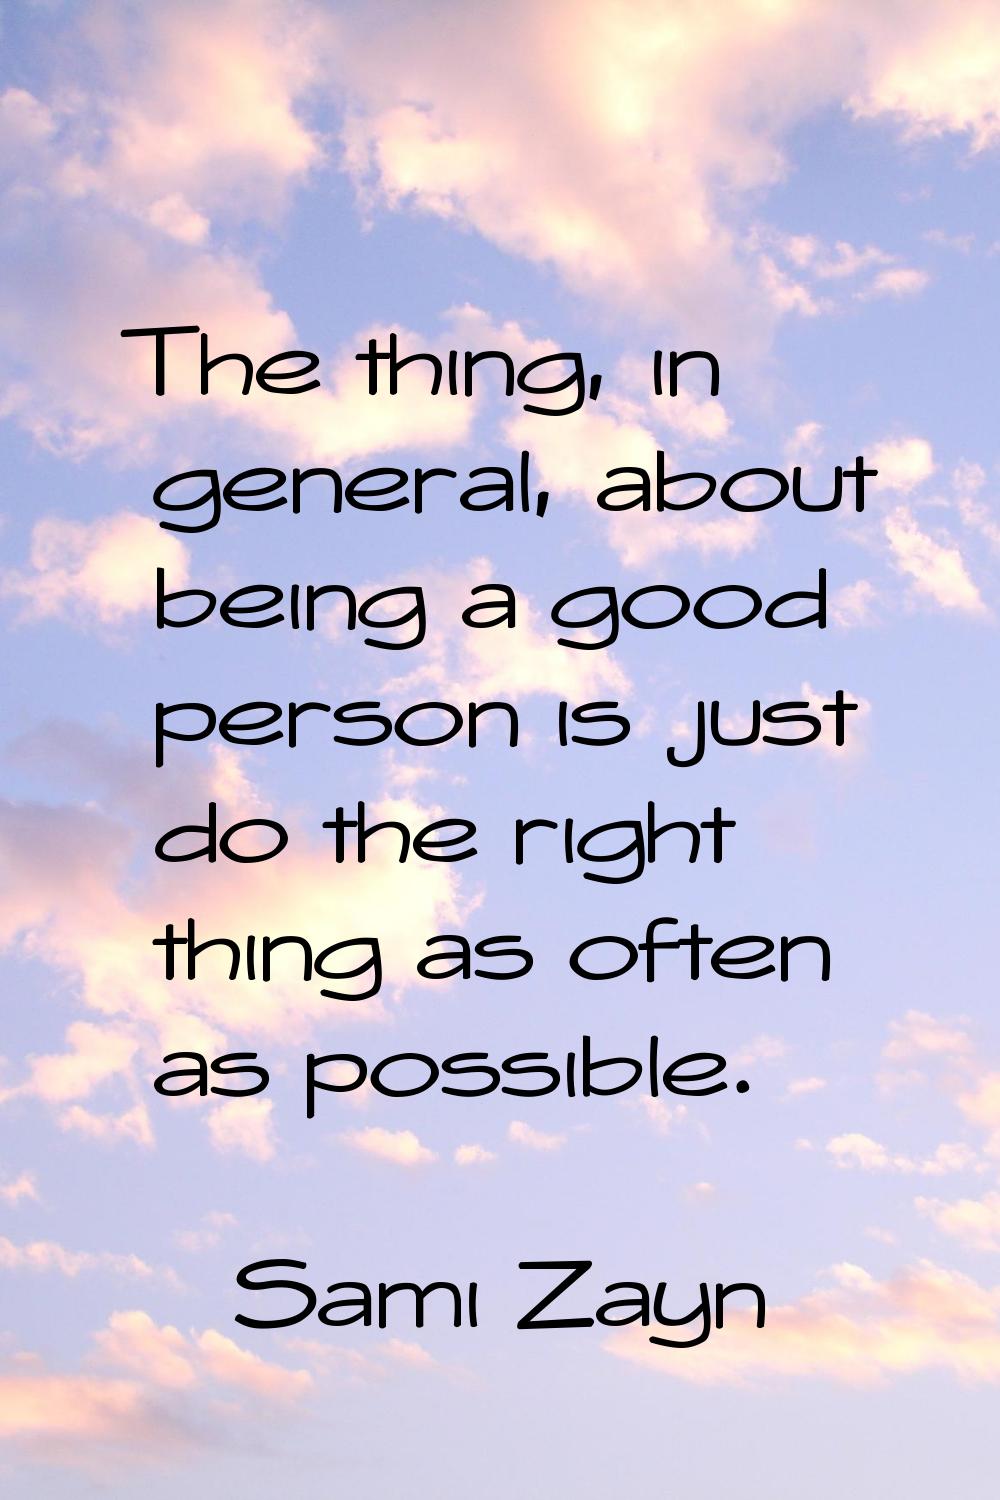 The thing, in general, about being a good person is just do the right thing as often as possible.